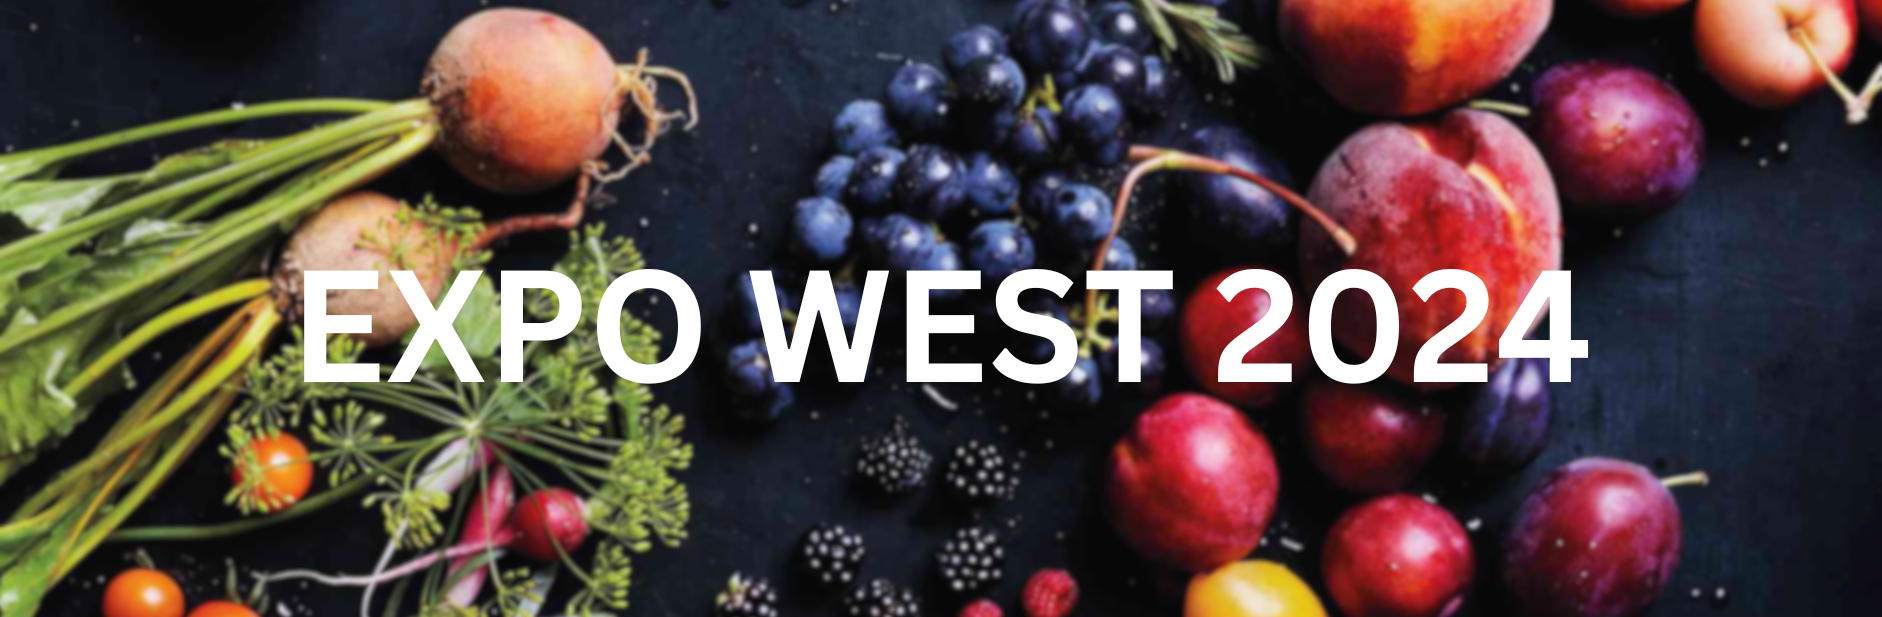 Header image for Expo West 2024